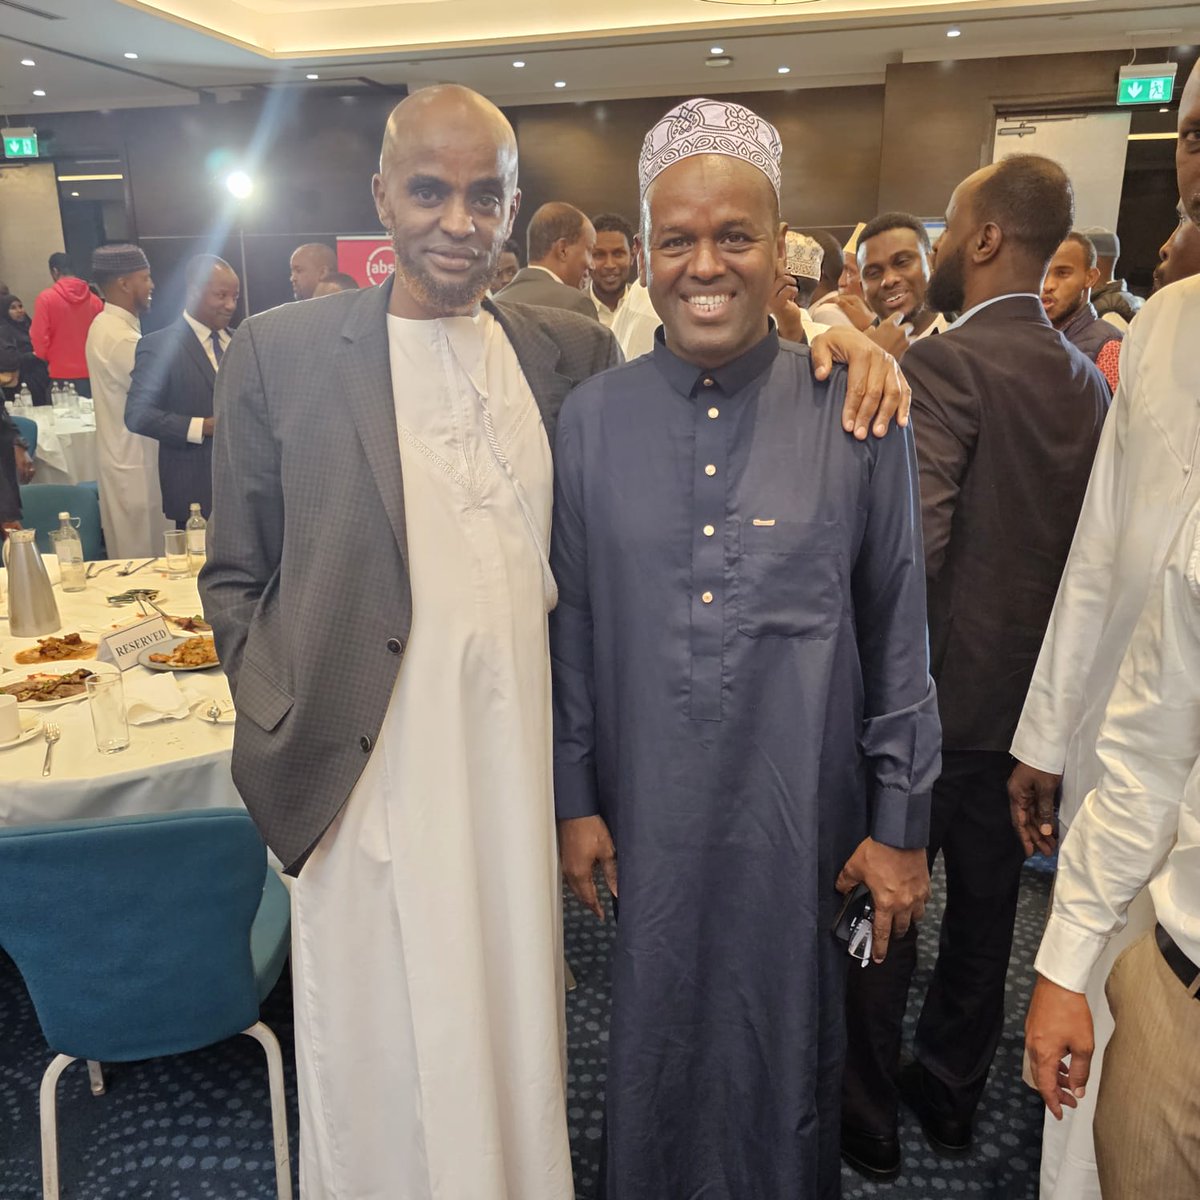 With @abdy_mohamed CEO @AbsaKenya during the bank's Iftar event last night at the @RadissonBlu